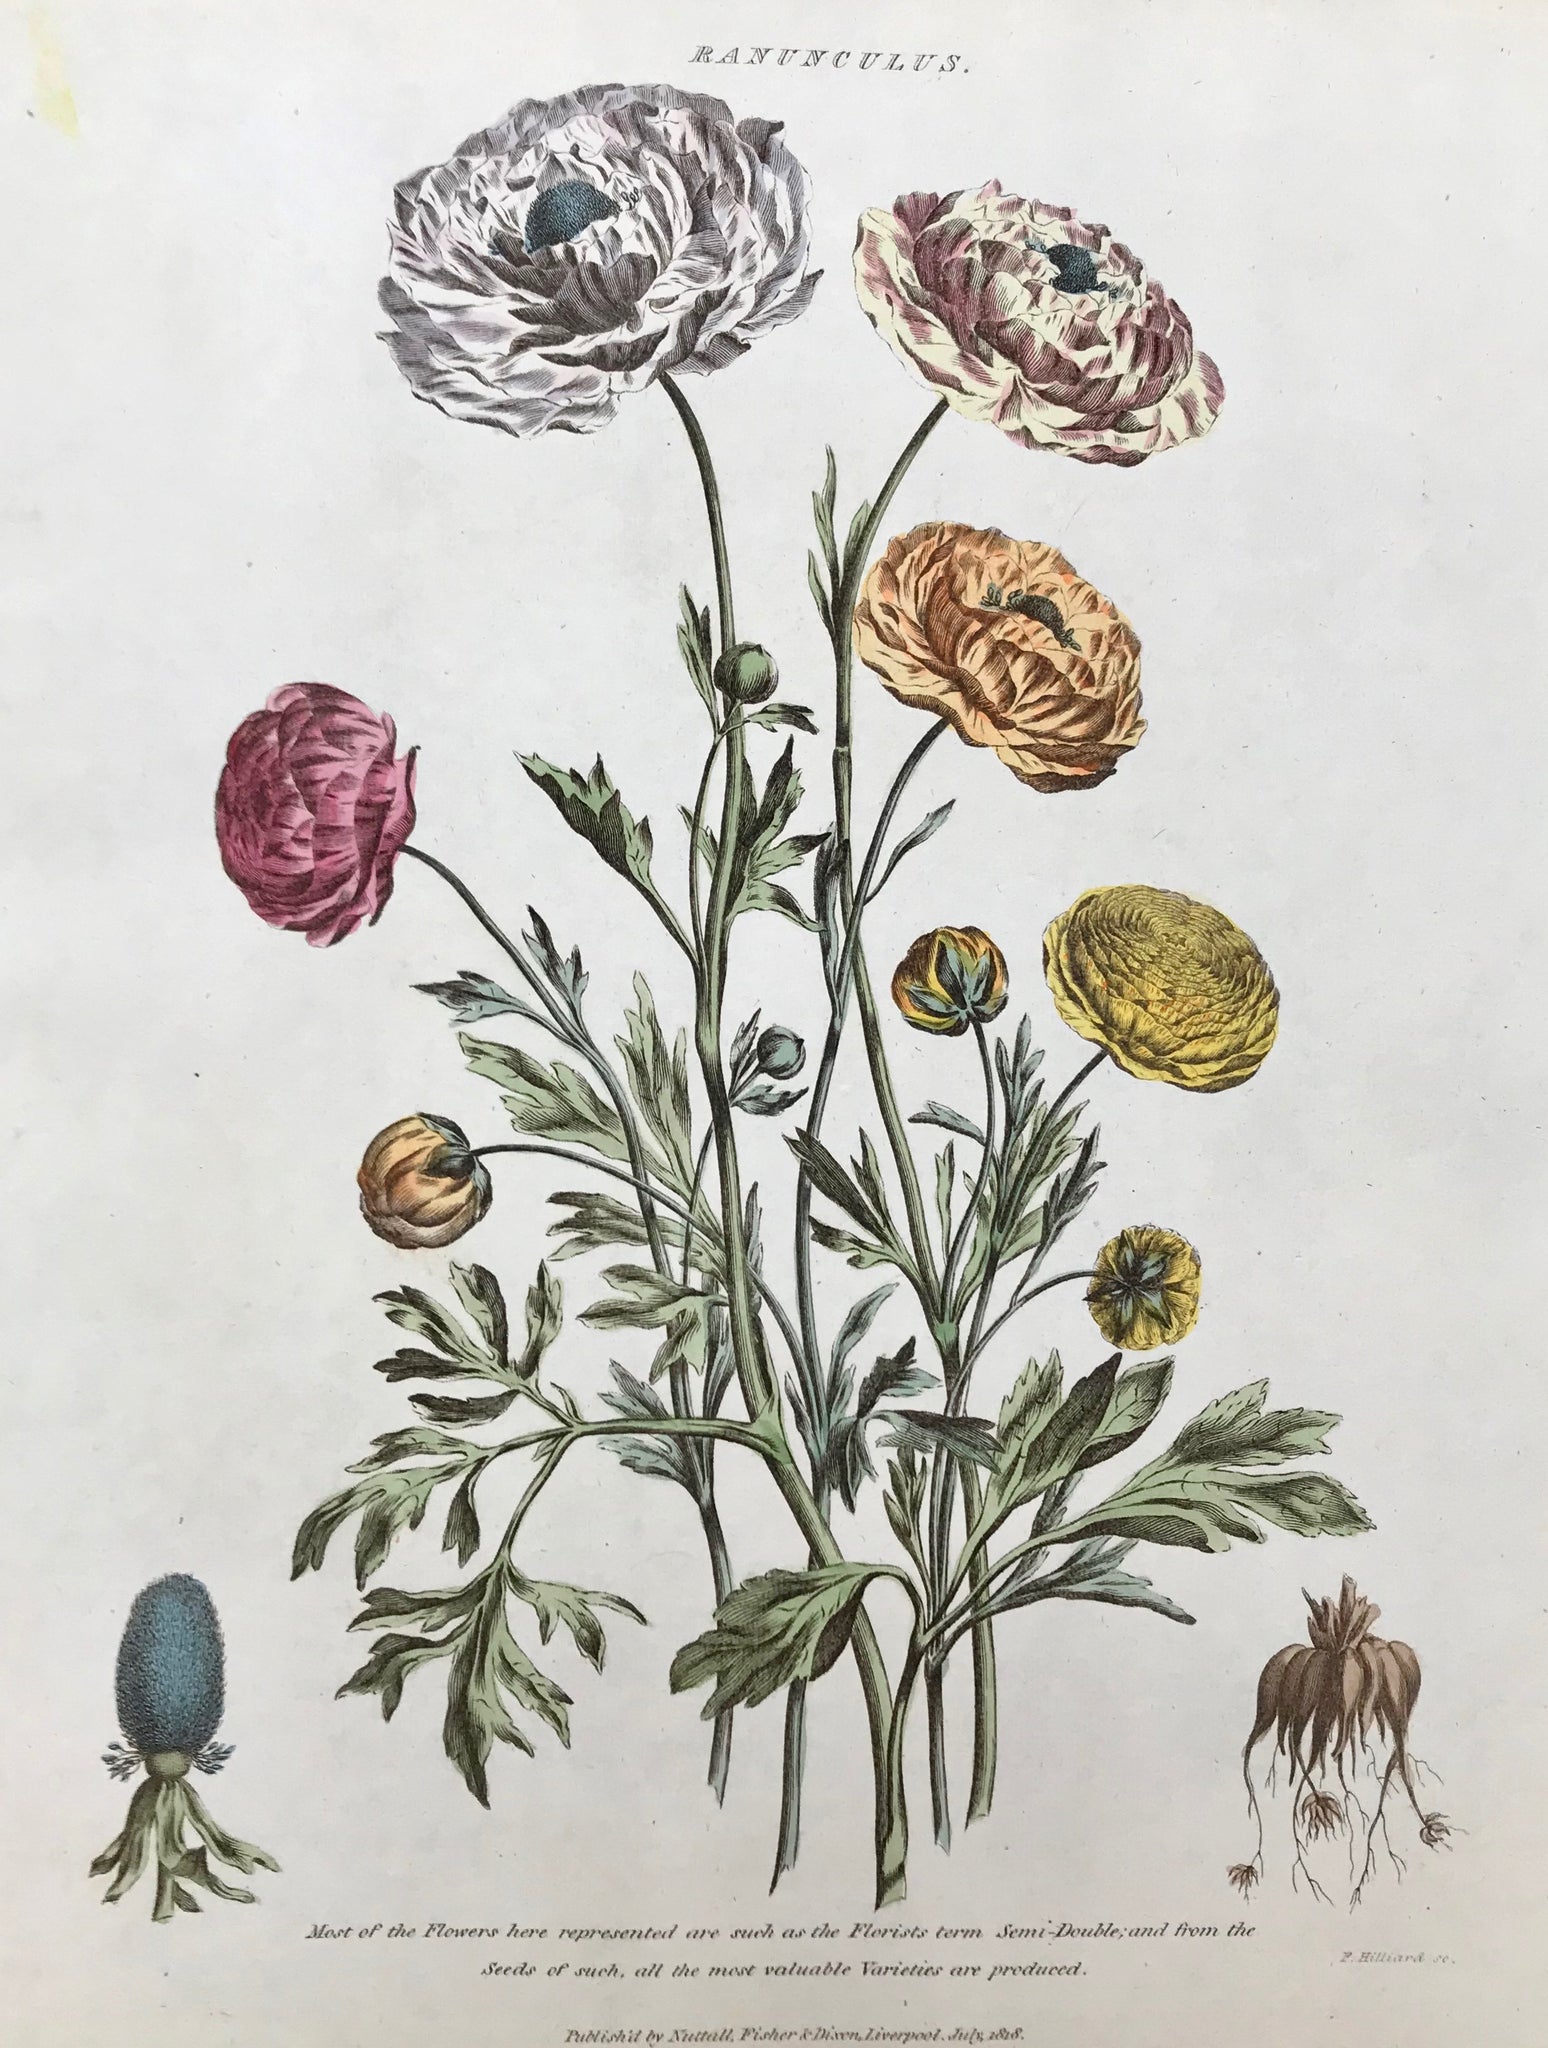 Ranunculus  Most of the Flowers here represented are such as the Florists term Semi-Double; and from the Seeds of such, all the most Valuble varieties are produced.  Antique Botanical Prints from "The Universal Herbal" by Thomas Green.  The complete title of this accurately and absolutely delightfully hand-colored work is: "The Universal Herbal", or Botanical, Medical, and Agricultural Dictionary,